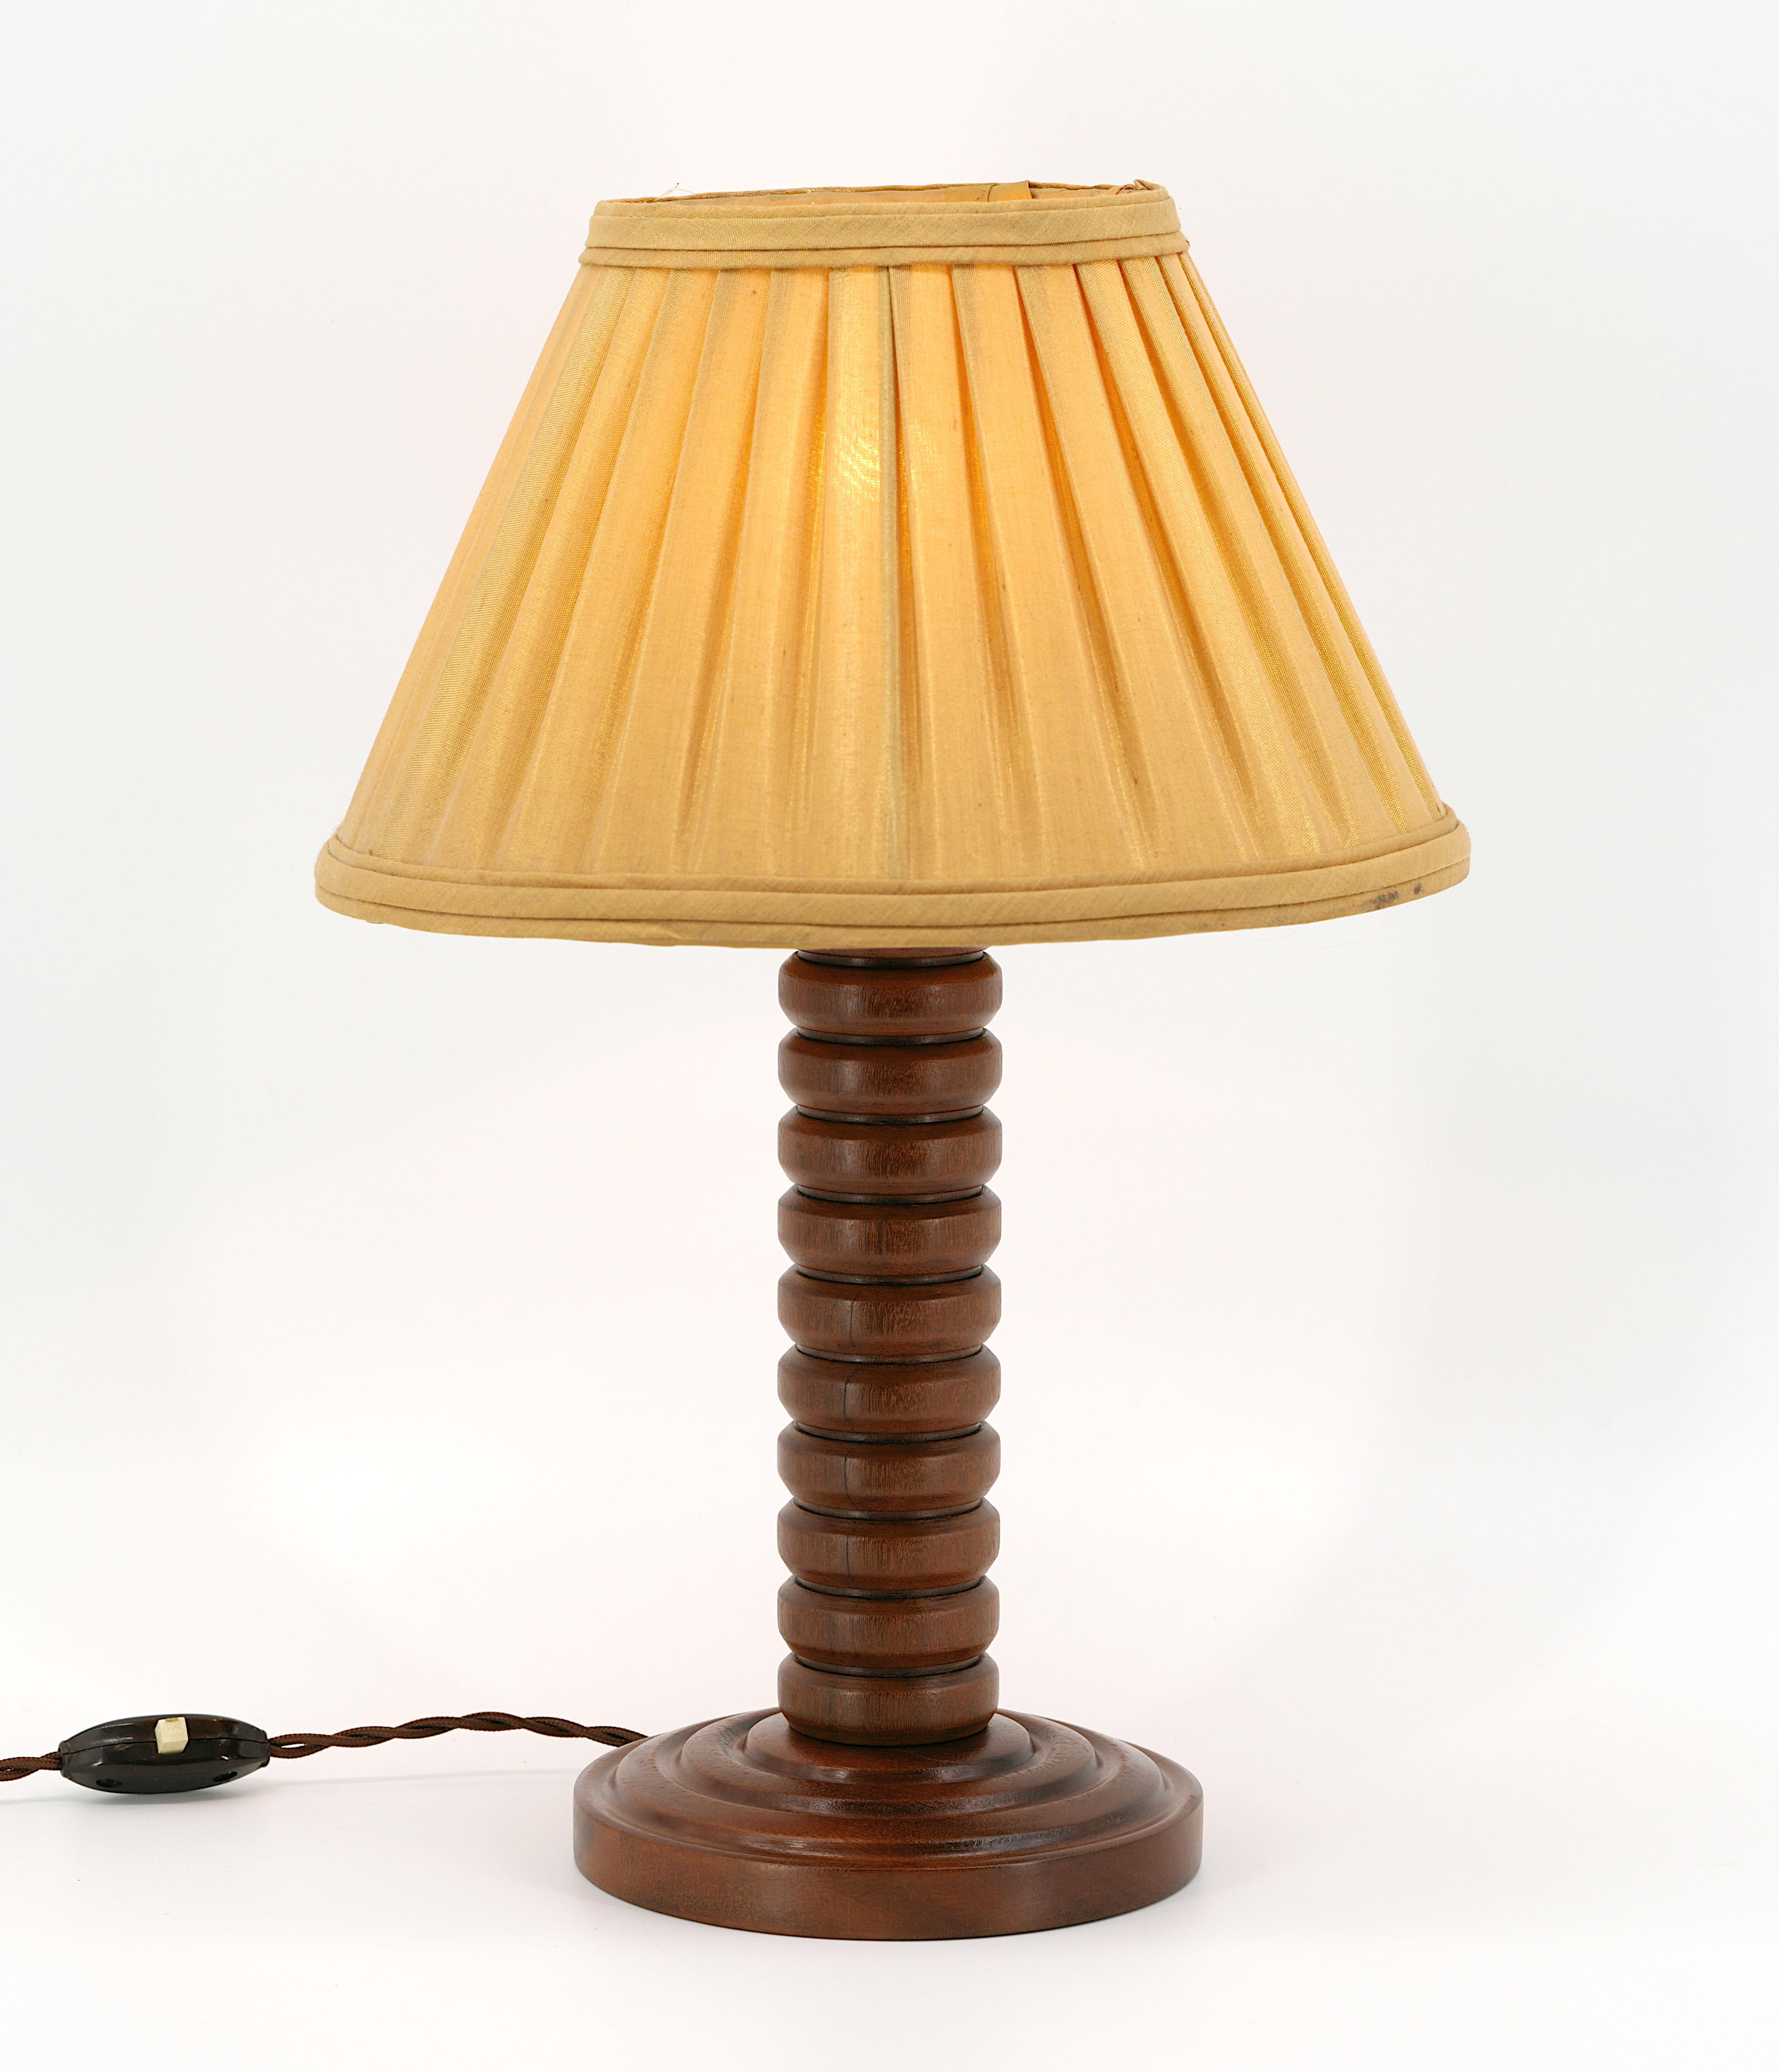 French Art Deco table lamp, 1930s, by Bouchard P&F, 31, rue de l'Avenir, Bagnolet (Lyon), France, 1930s. Wooden base by Bouchard Père & Fils (mahogany?). The lampshade was sold separately. This one is old and shows traces of age, but it can be